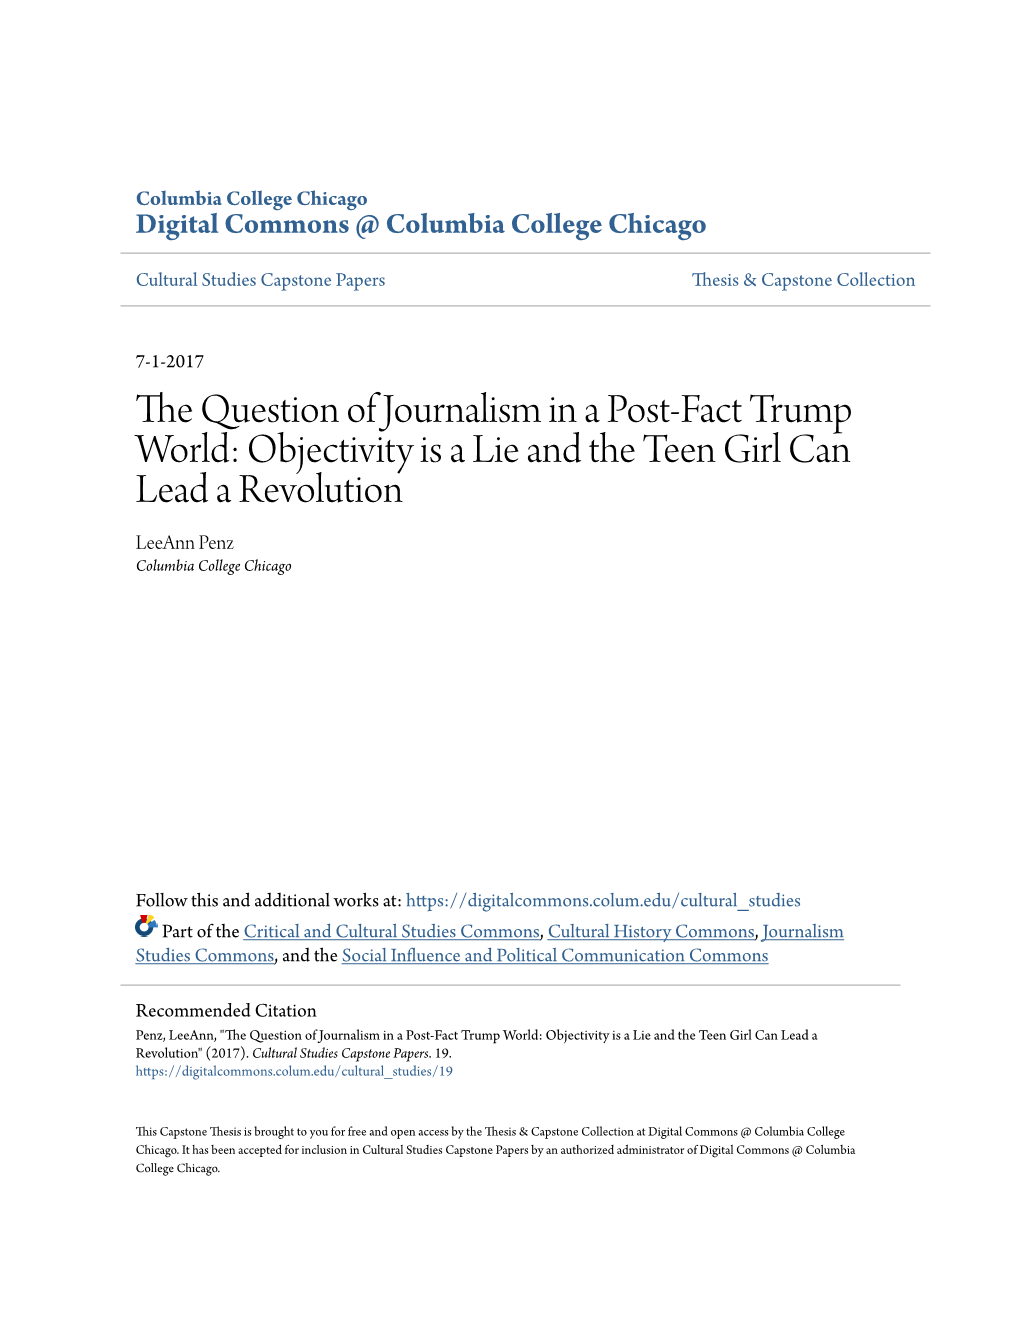 The Question of Journalism in a Post-Fact Trump World: Objectivity Is a Lie and the Teen Girl Can Lead a Revolution Leeann Penz Columbia College Chicago